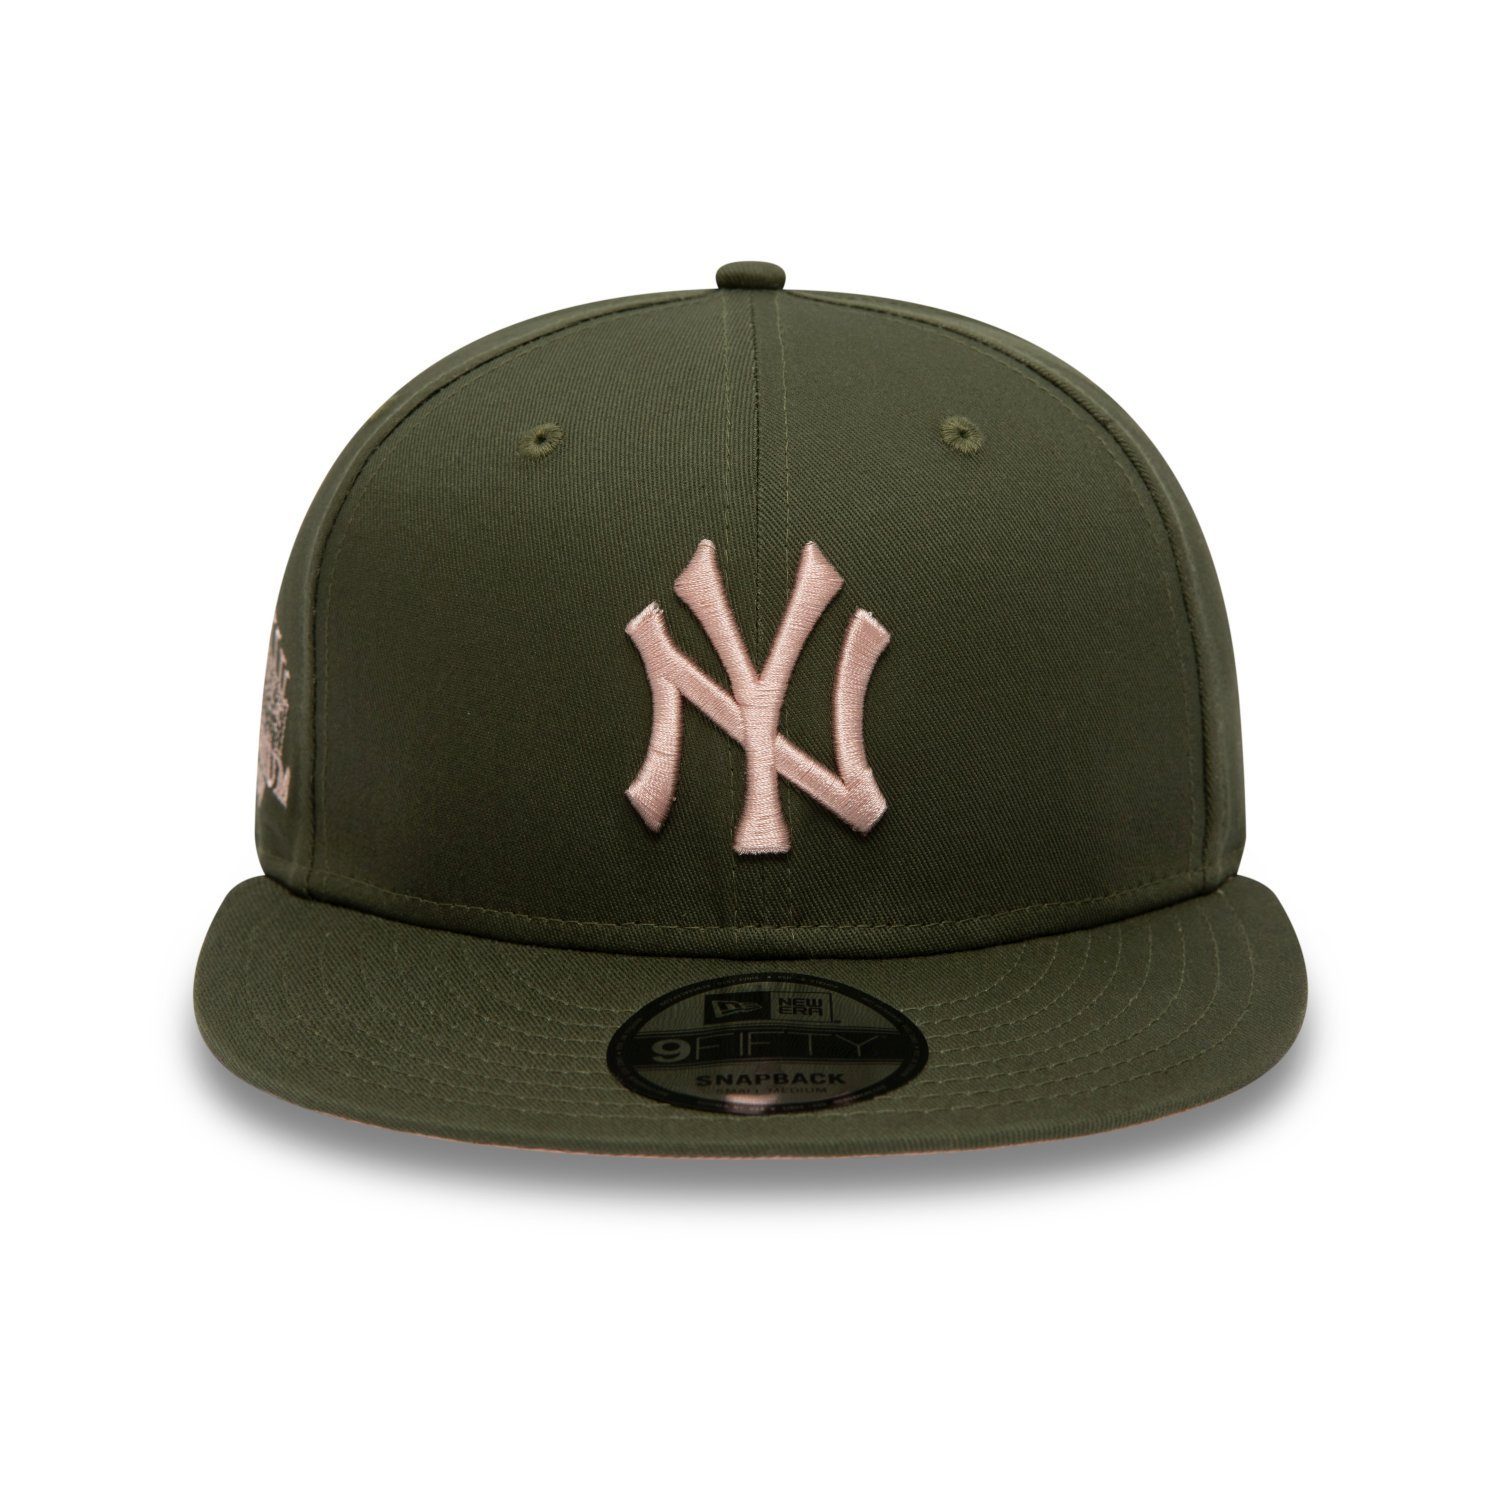 New York Yankees New SIDE Snapback Era 9Fifty Cap oliv PATCH